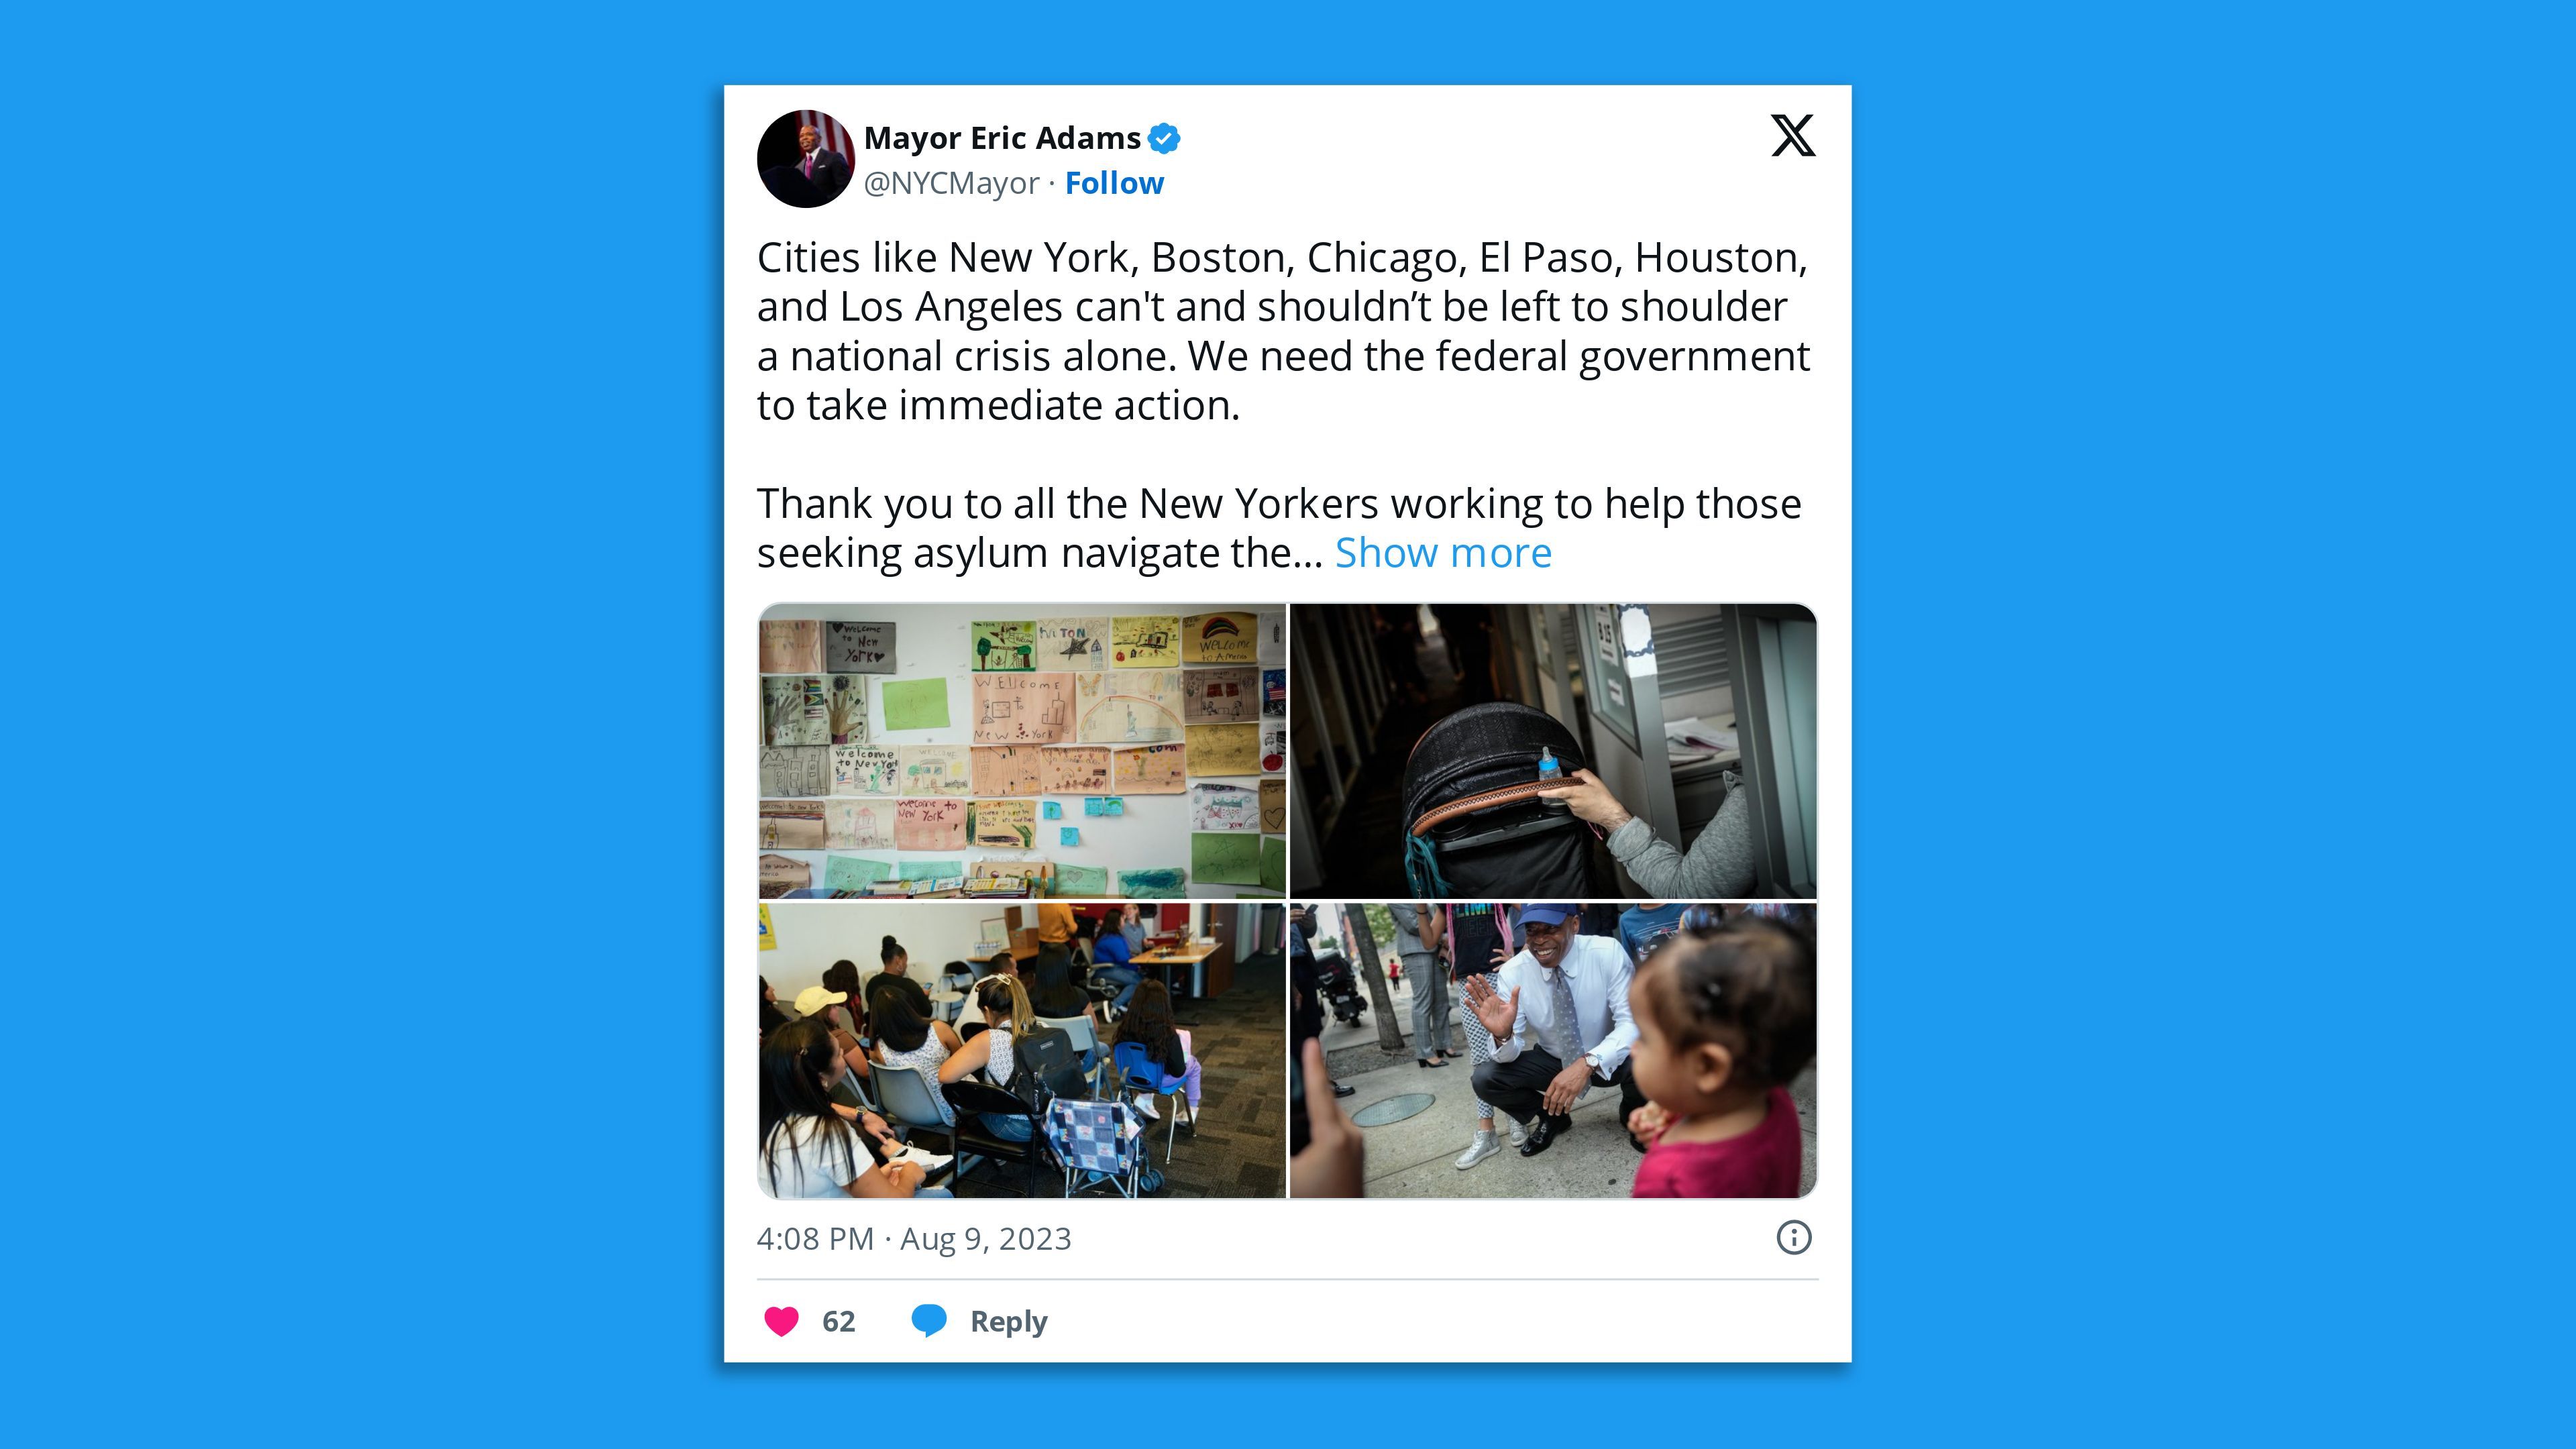 A screenshot of a tweet by New York City Mayor Eric Adams, saying: "Cities like New York, Boston, Chicago, El Paso, Houston, and Los Angeles can't and shouldn’t be left to shoulder a national crisis alone. We need the federal government to take immediate action.   Thank you to all the New Yorkers working to help those seeking asylum navigate the process."